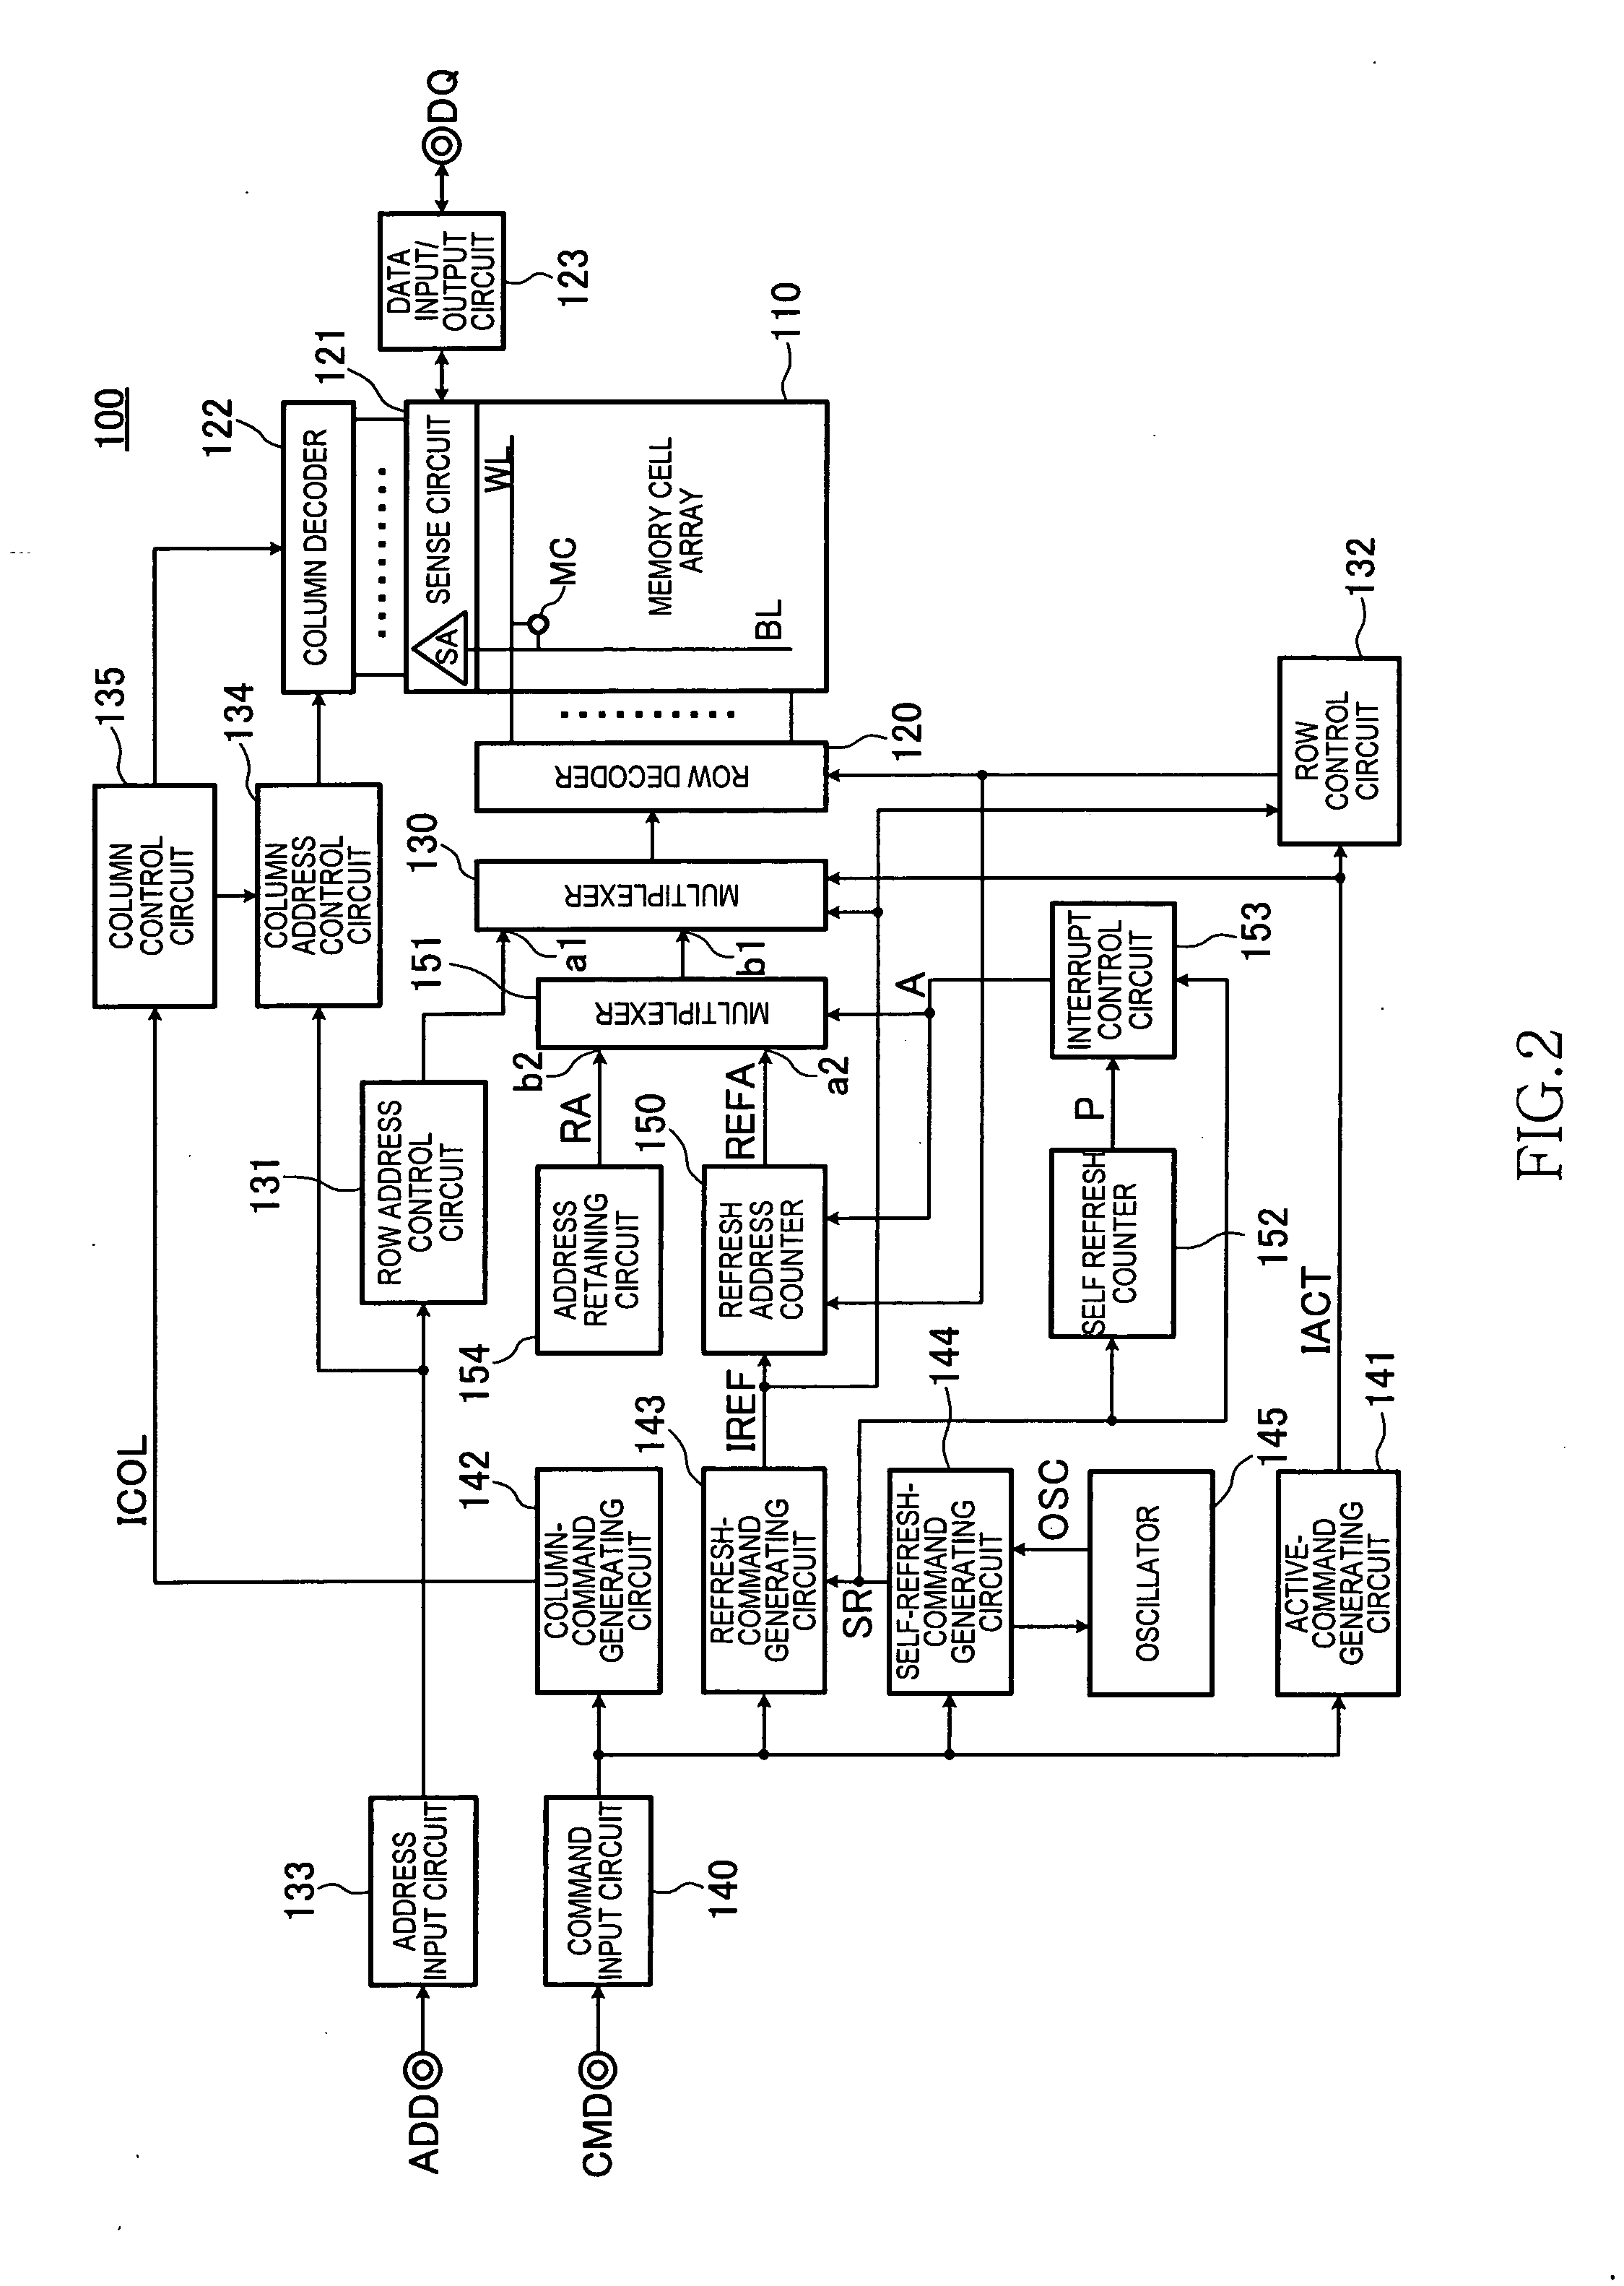 Semiconductor device including memory cells that require refresh operation